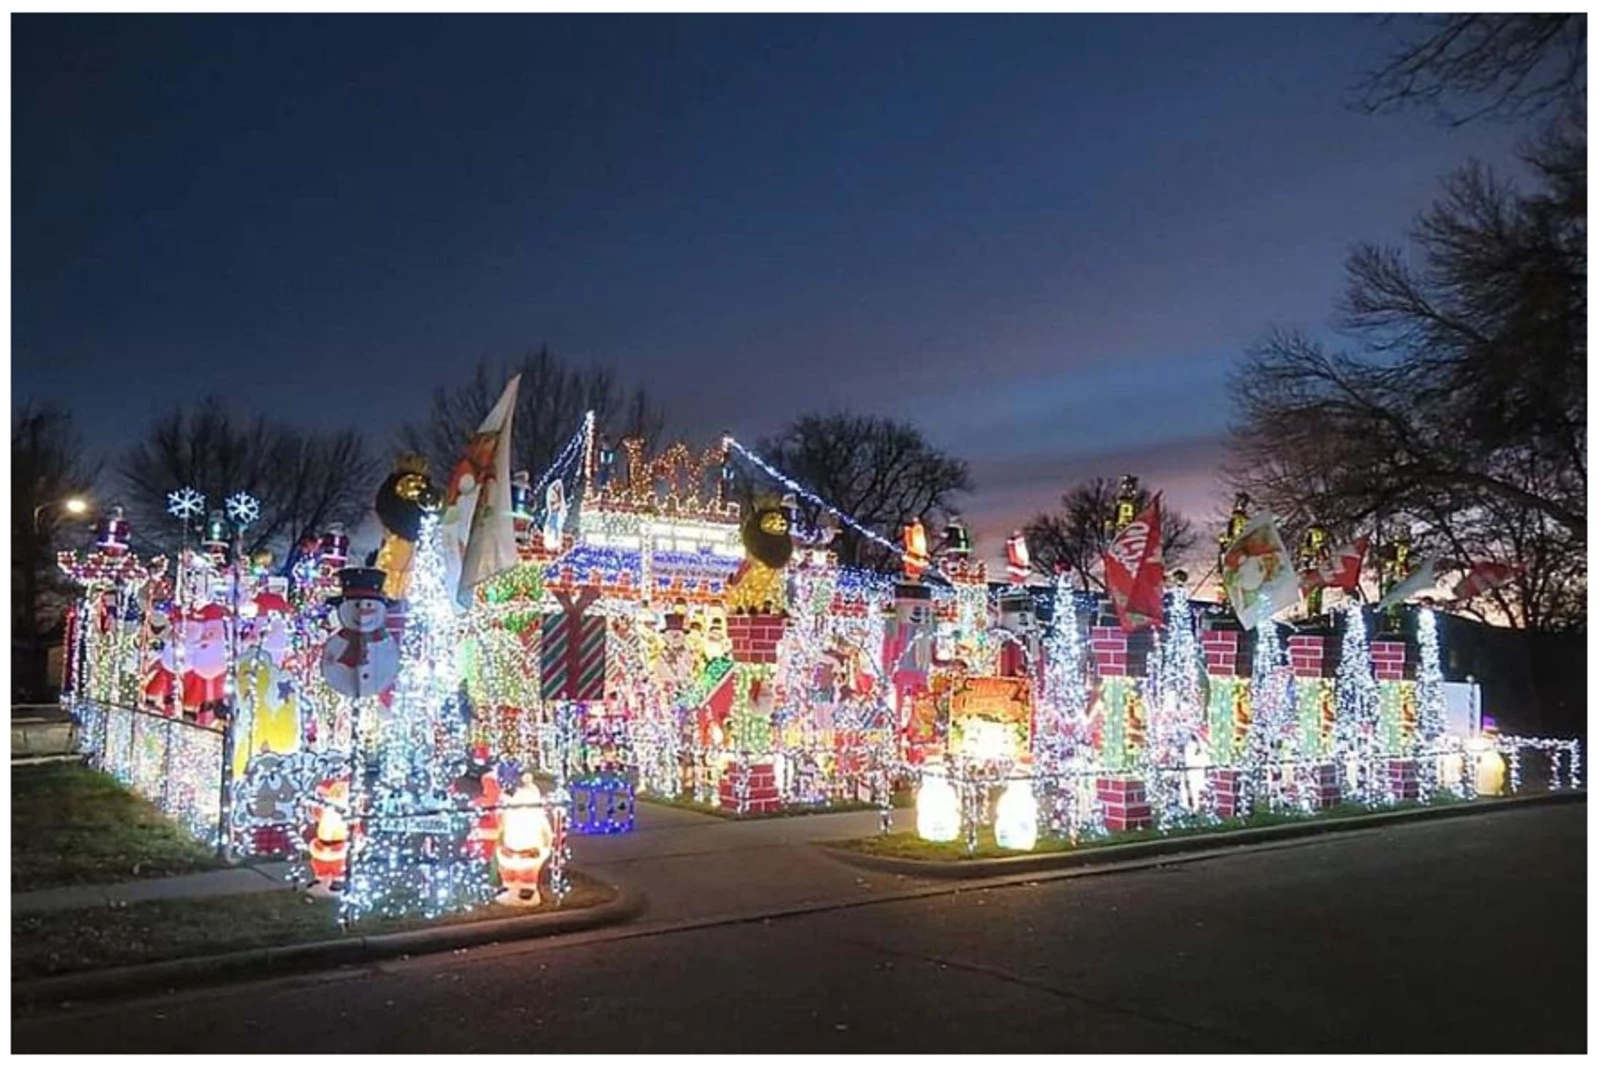 Show Us Your Lights, Billings. You Could Win 500 for Christmas